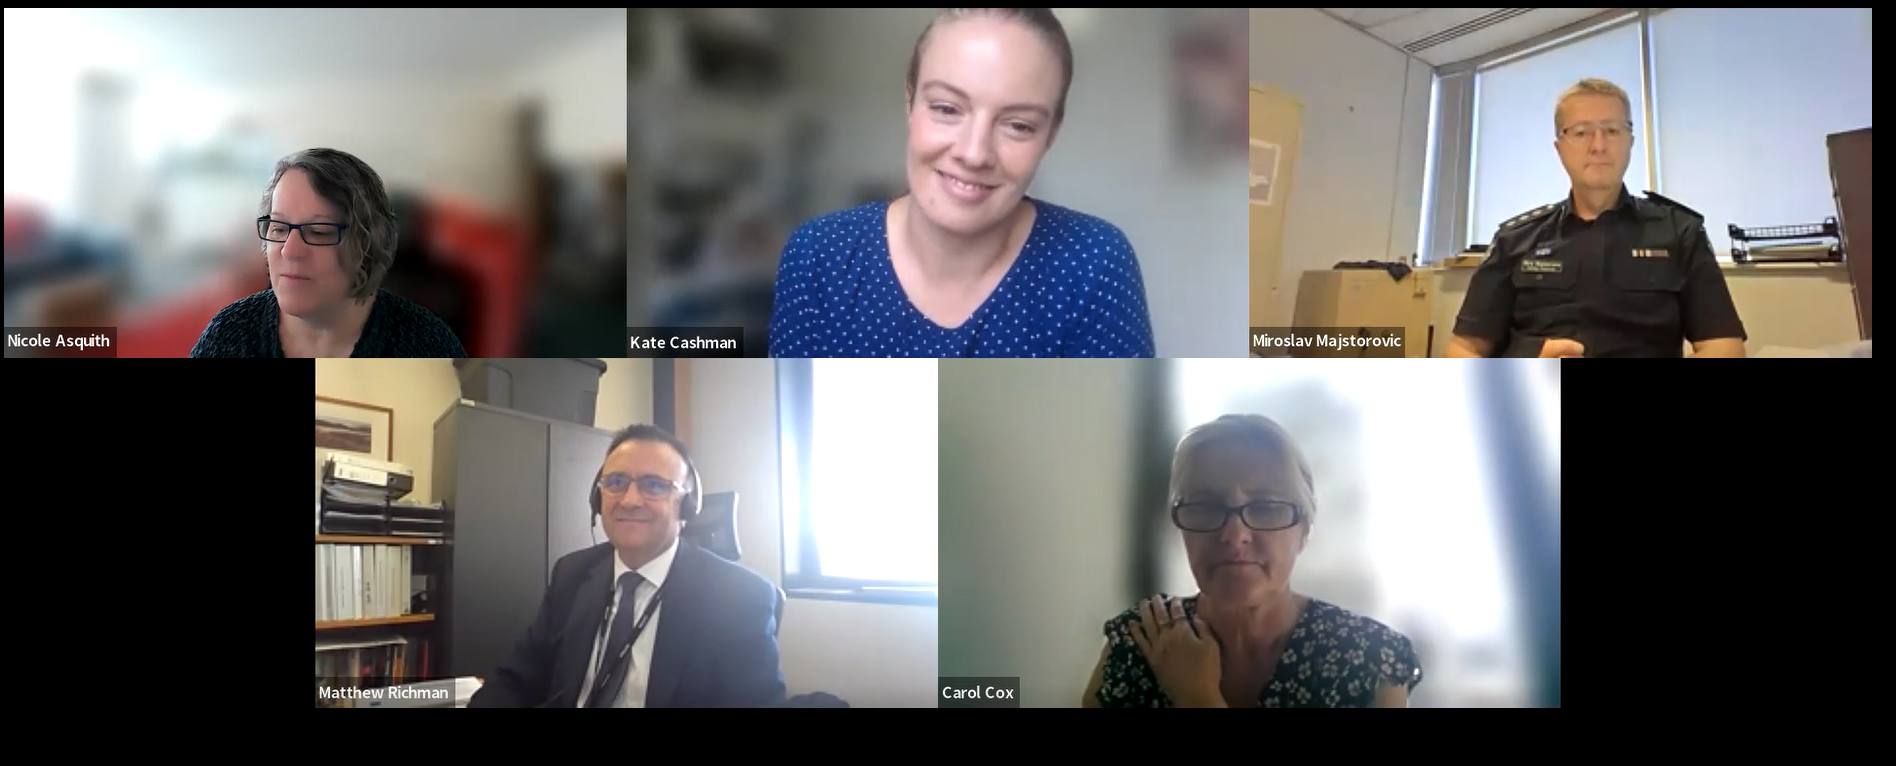 Screenshot of Zoom meeting. A gallery view of five people is pictured. The people are Nicole Asquith, Kate Cashman, Miro Majstorovic, Matthew Richman and Carol Cox. Nicole Asquith is speaking. 